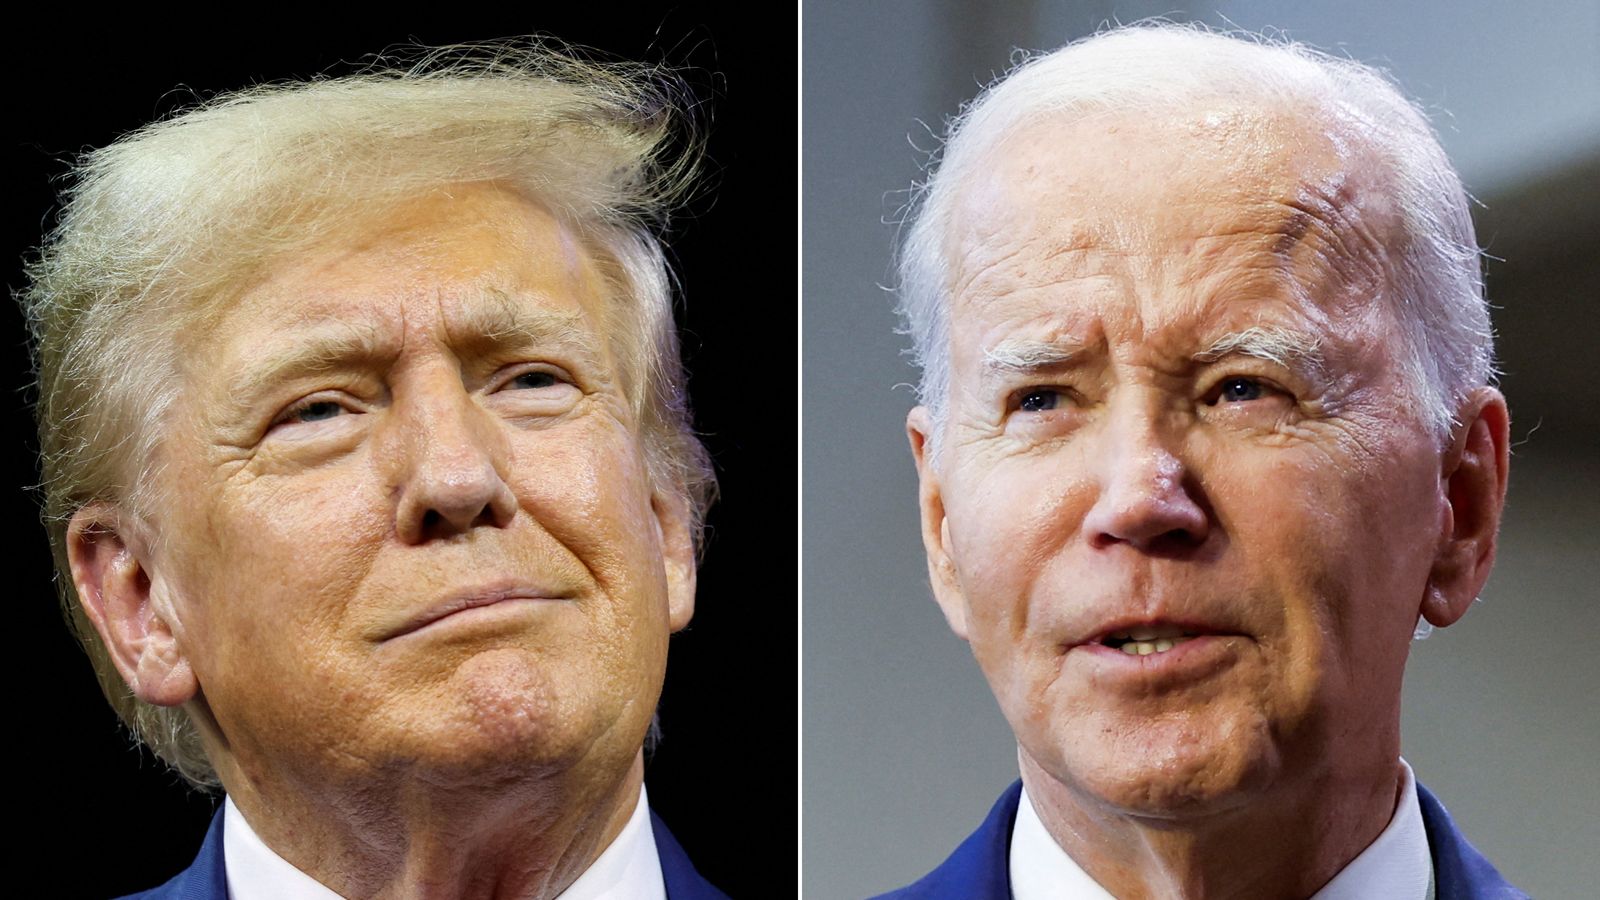 Former President Donald Trump holds an edge over President Joe Biden in a series of hypothetical ma...